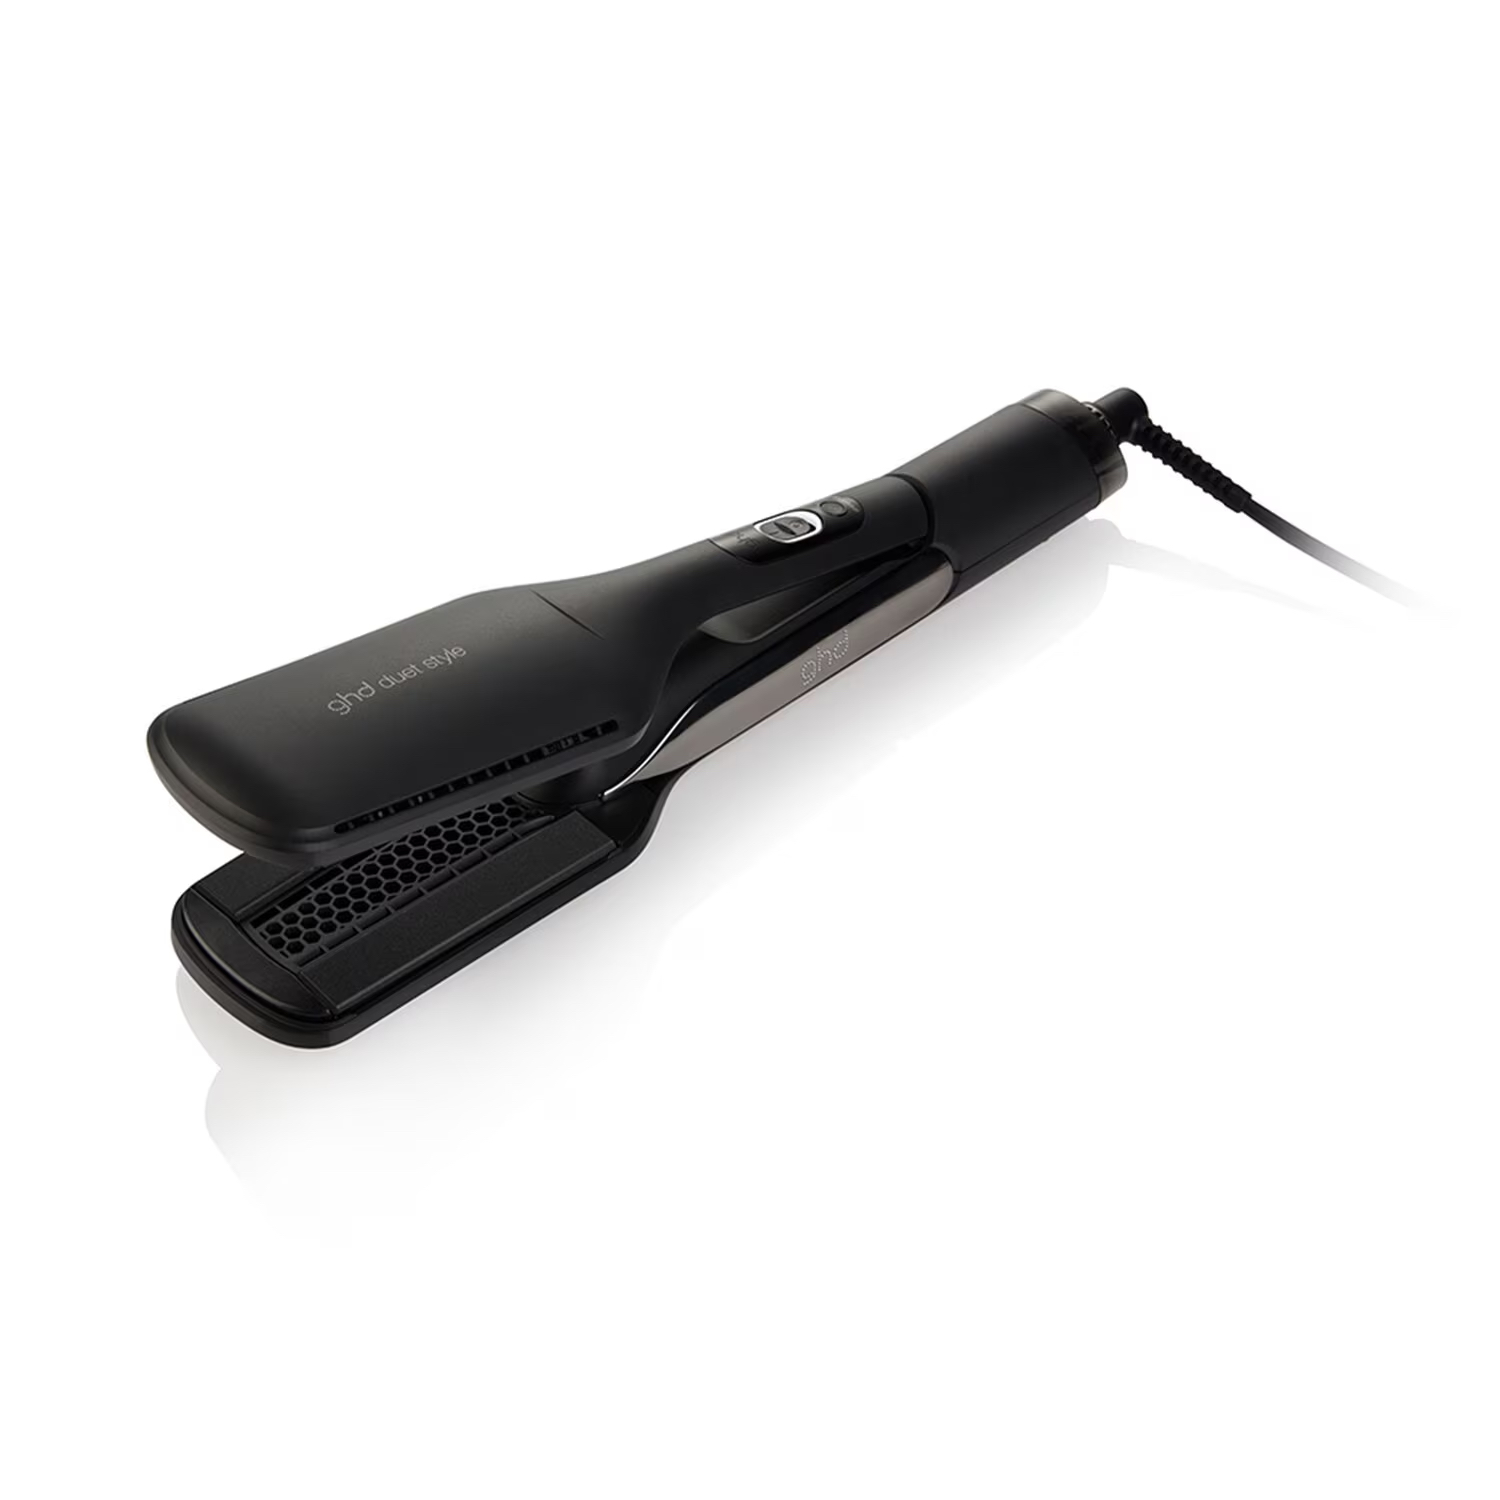 GHD Duet Style - Professional 2-in-1 Hot Air Styler